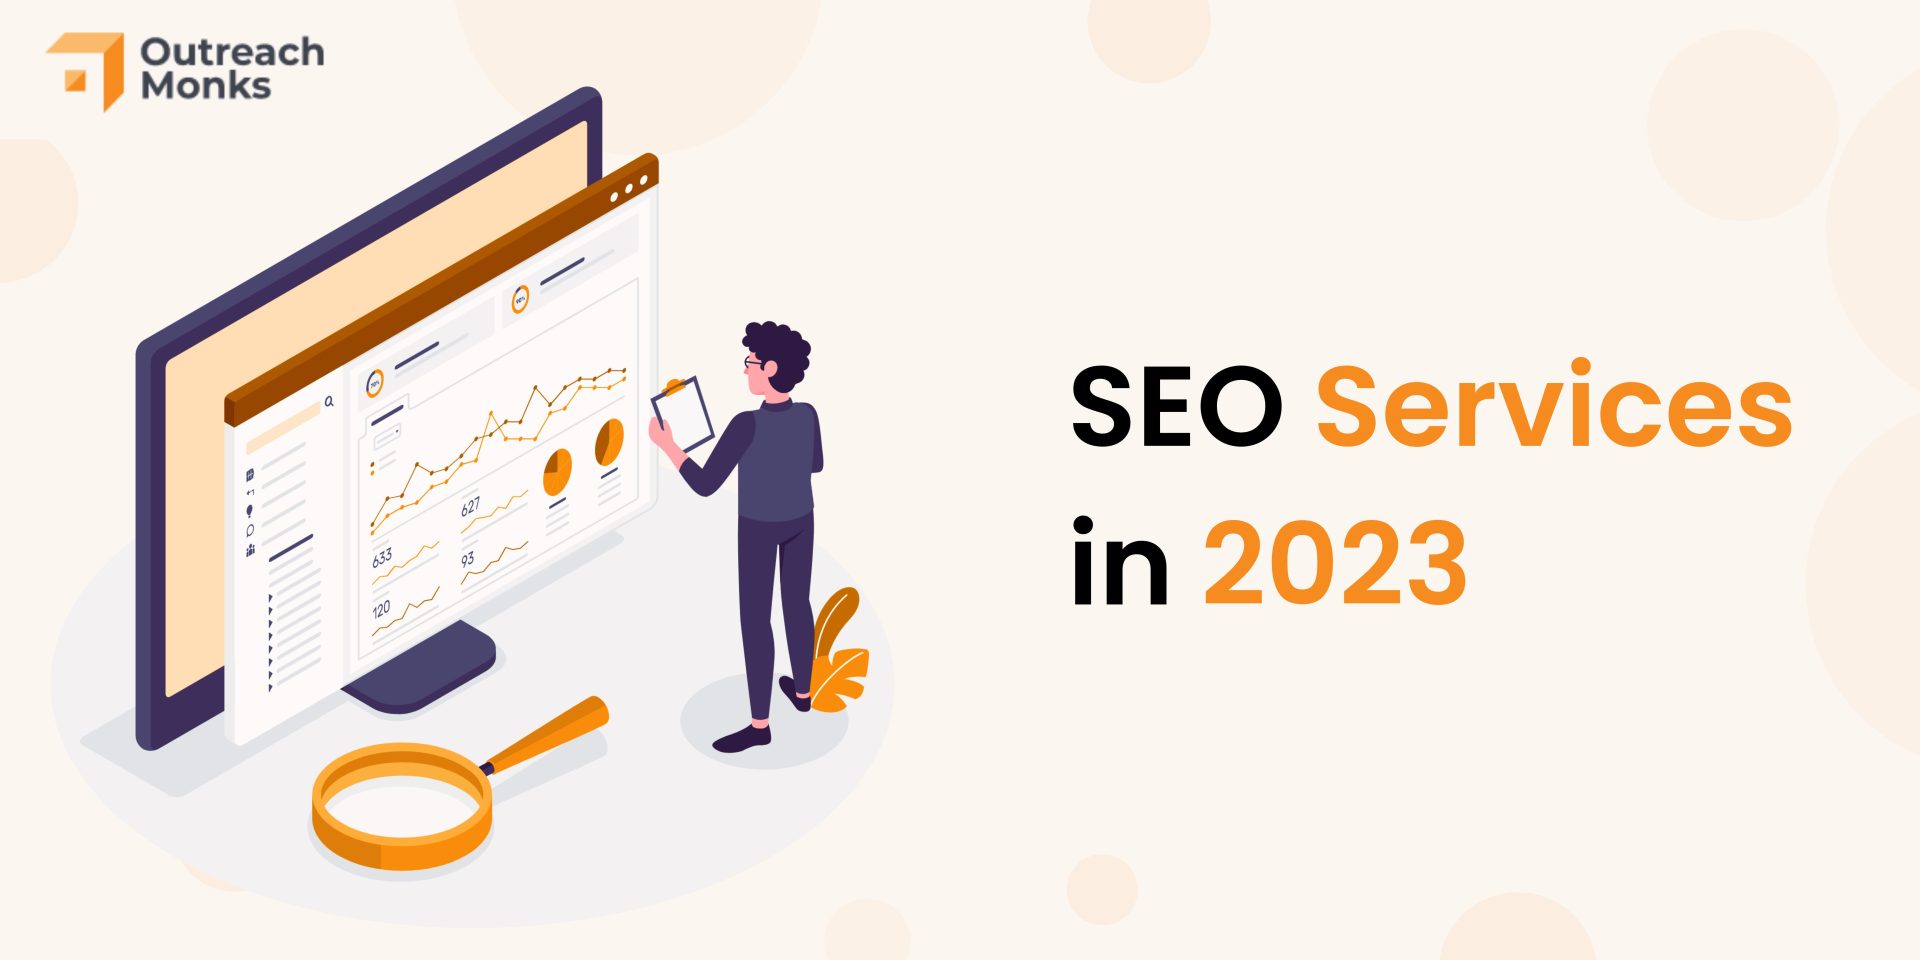 SEO Services in 2023